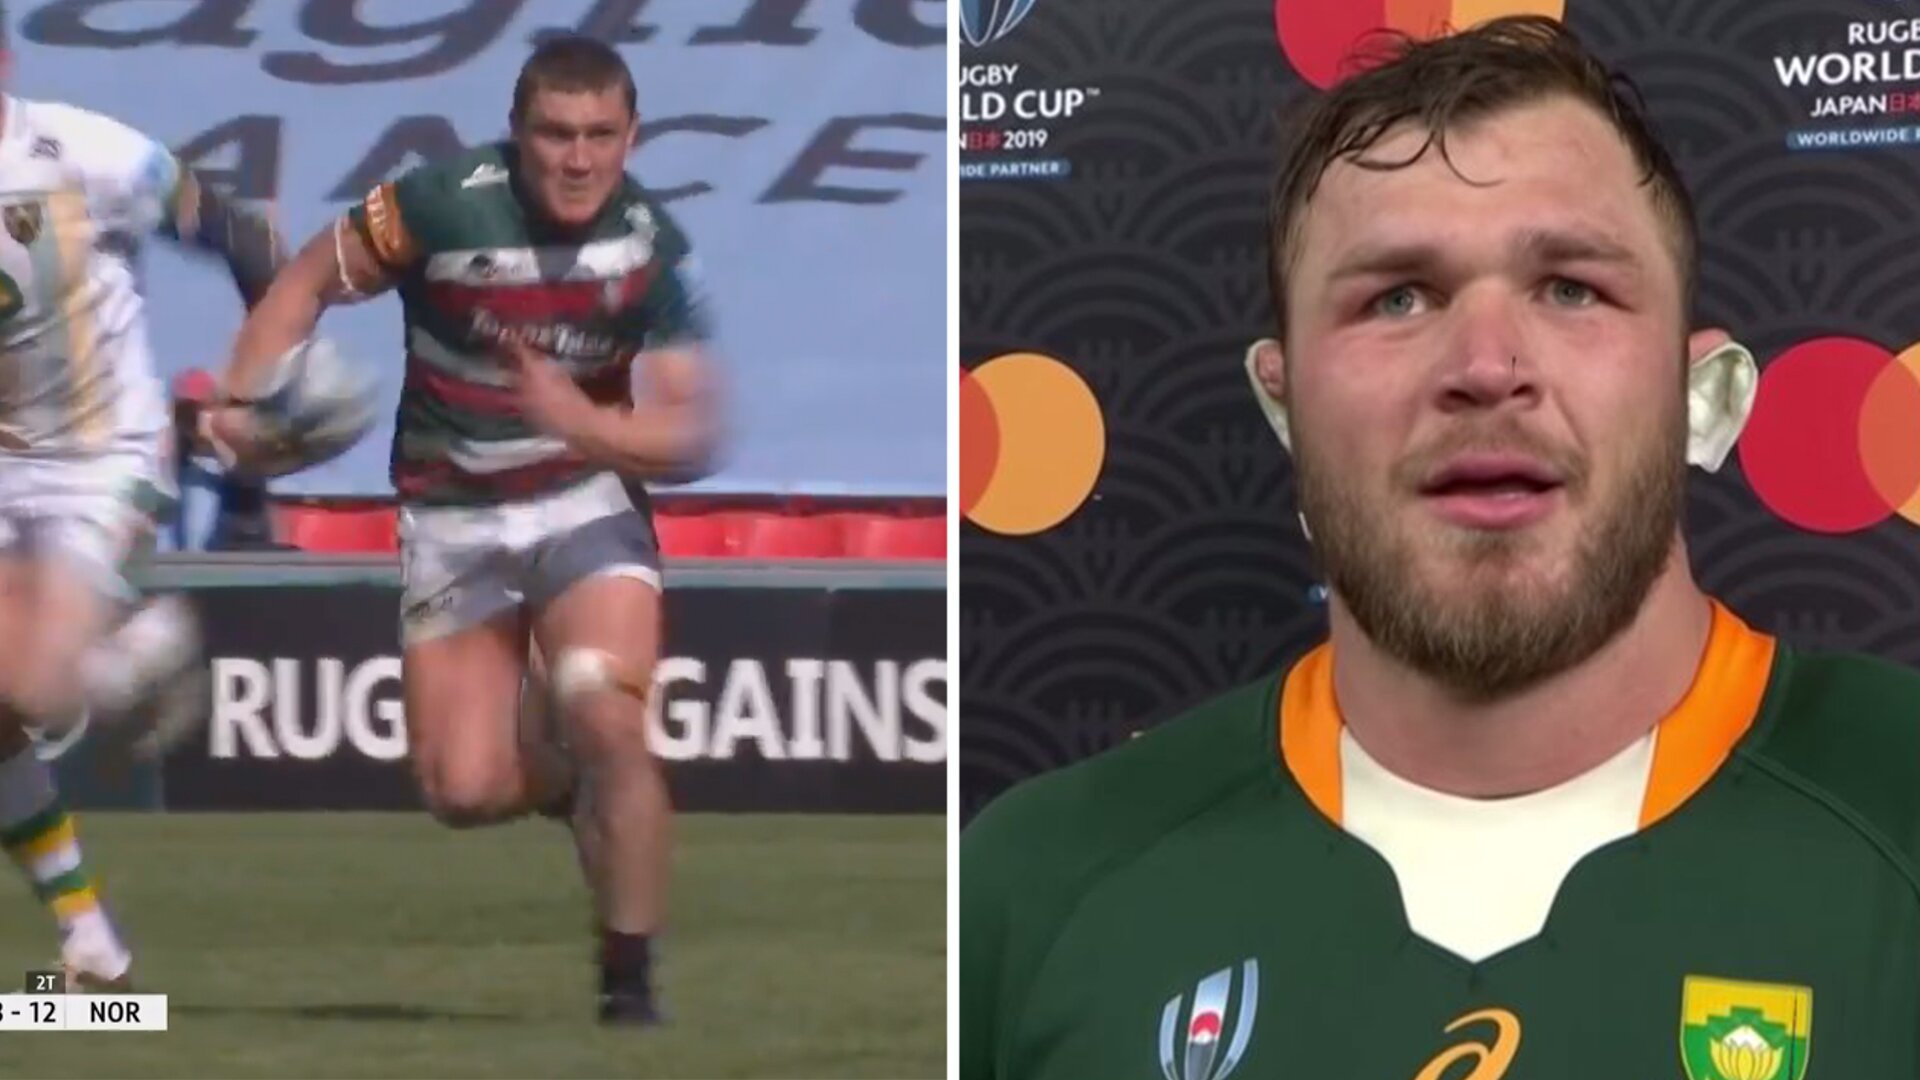 South Africa may have very well found a terrifying replacement for Duane Vermeulen